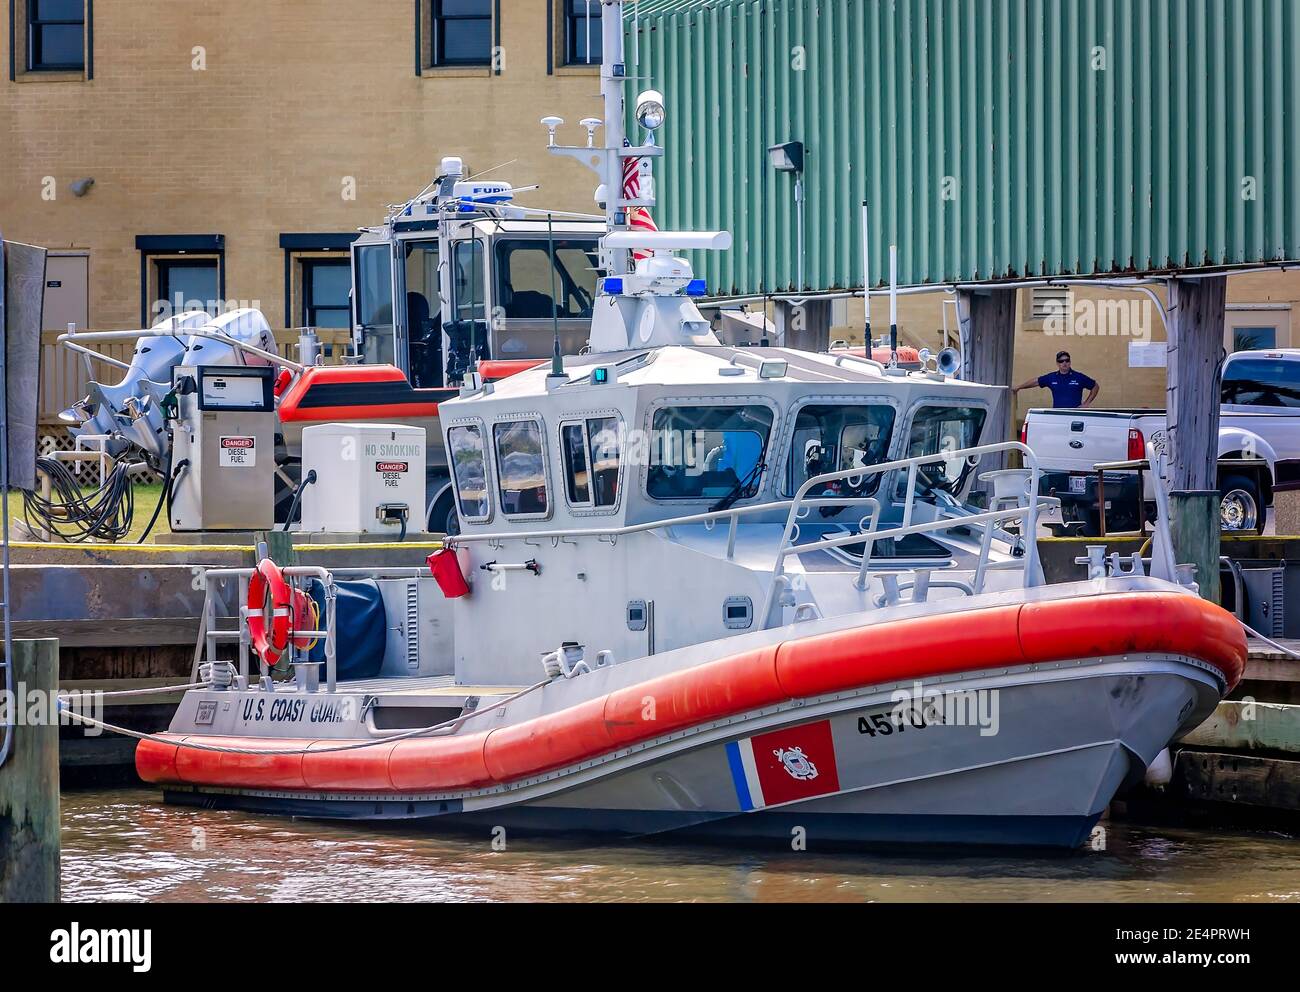 A U.S. Coast Guard boat is docked outside the United States Coast Guard Station, March 7, 2016, in Dauphin Island, Alabama. Stock Photo